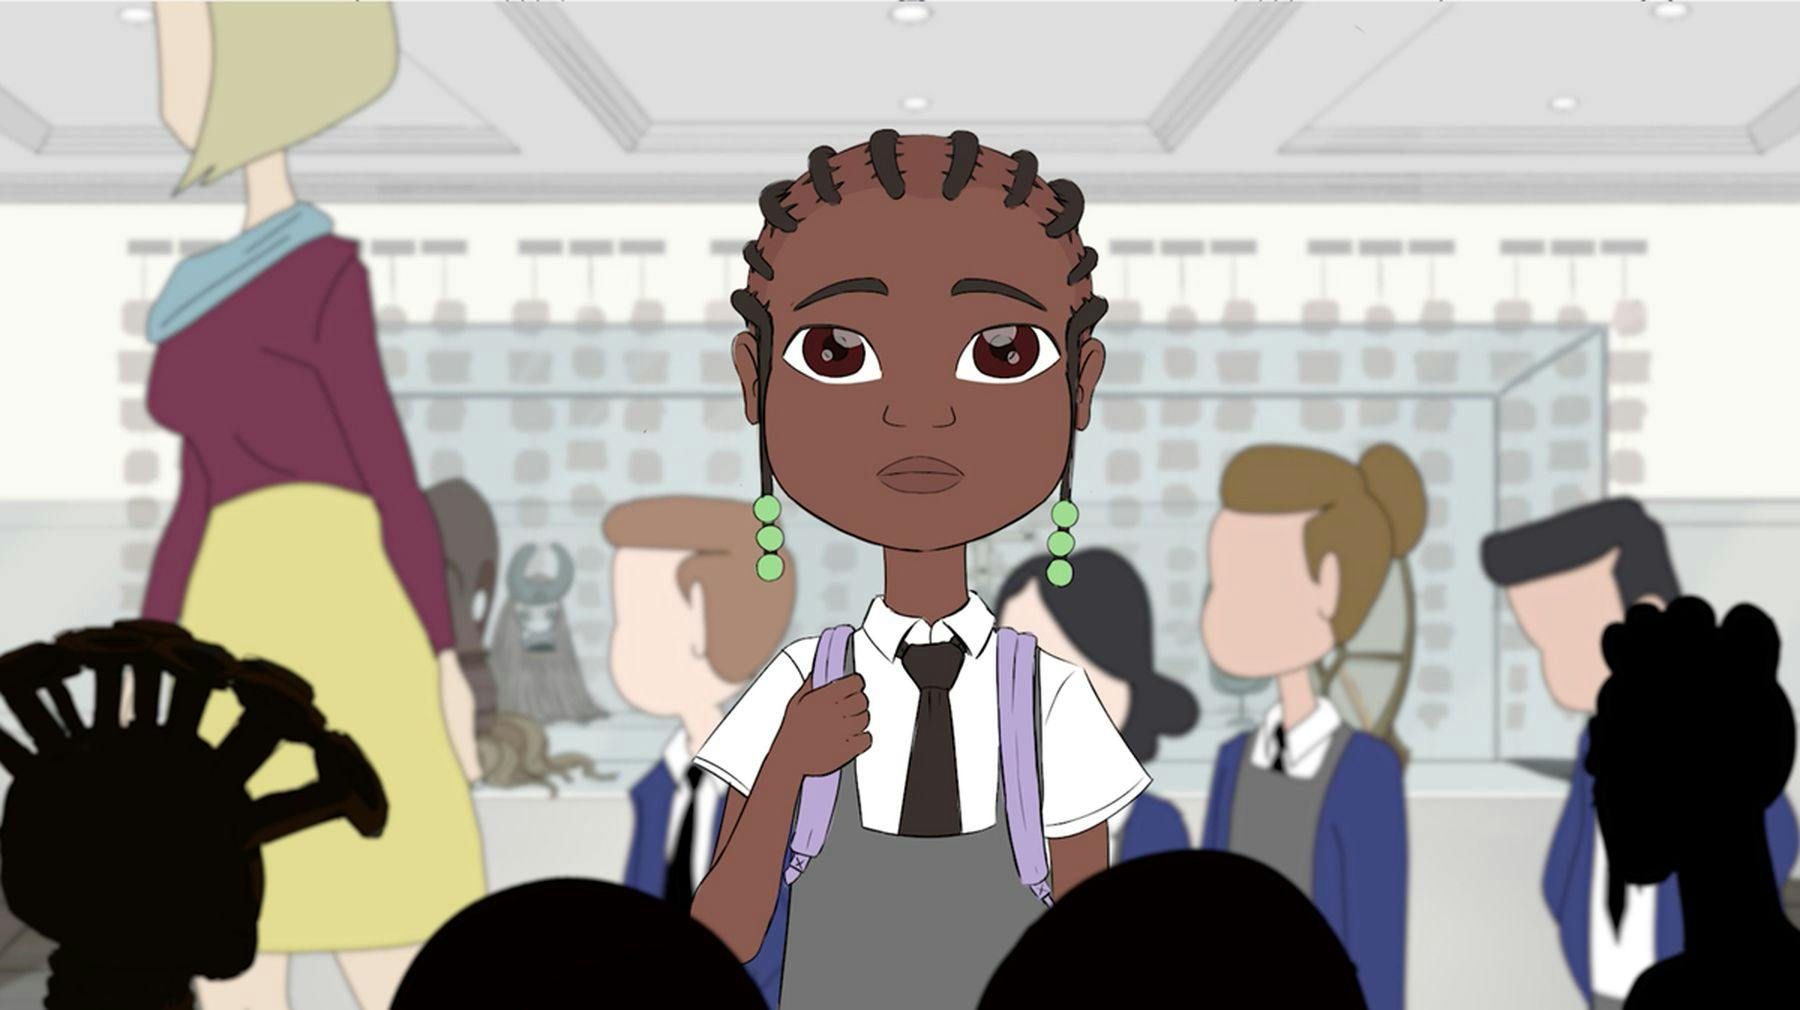 Cartoon of a child wearing a white shirt, dark grey tie and a light grey pinafore. Their hair is back in braids, they have large brown eyes and they stare directly at the viewer.  Other characters appeared blurred behind them.